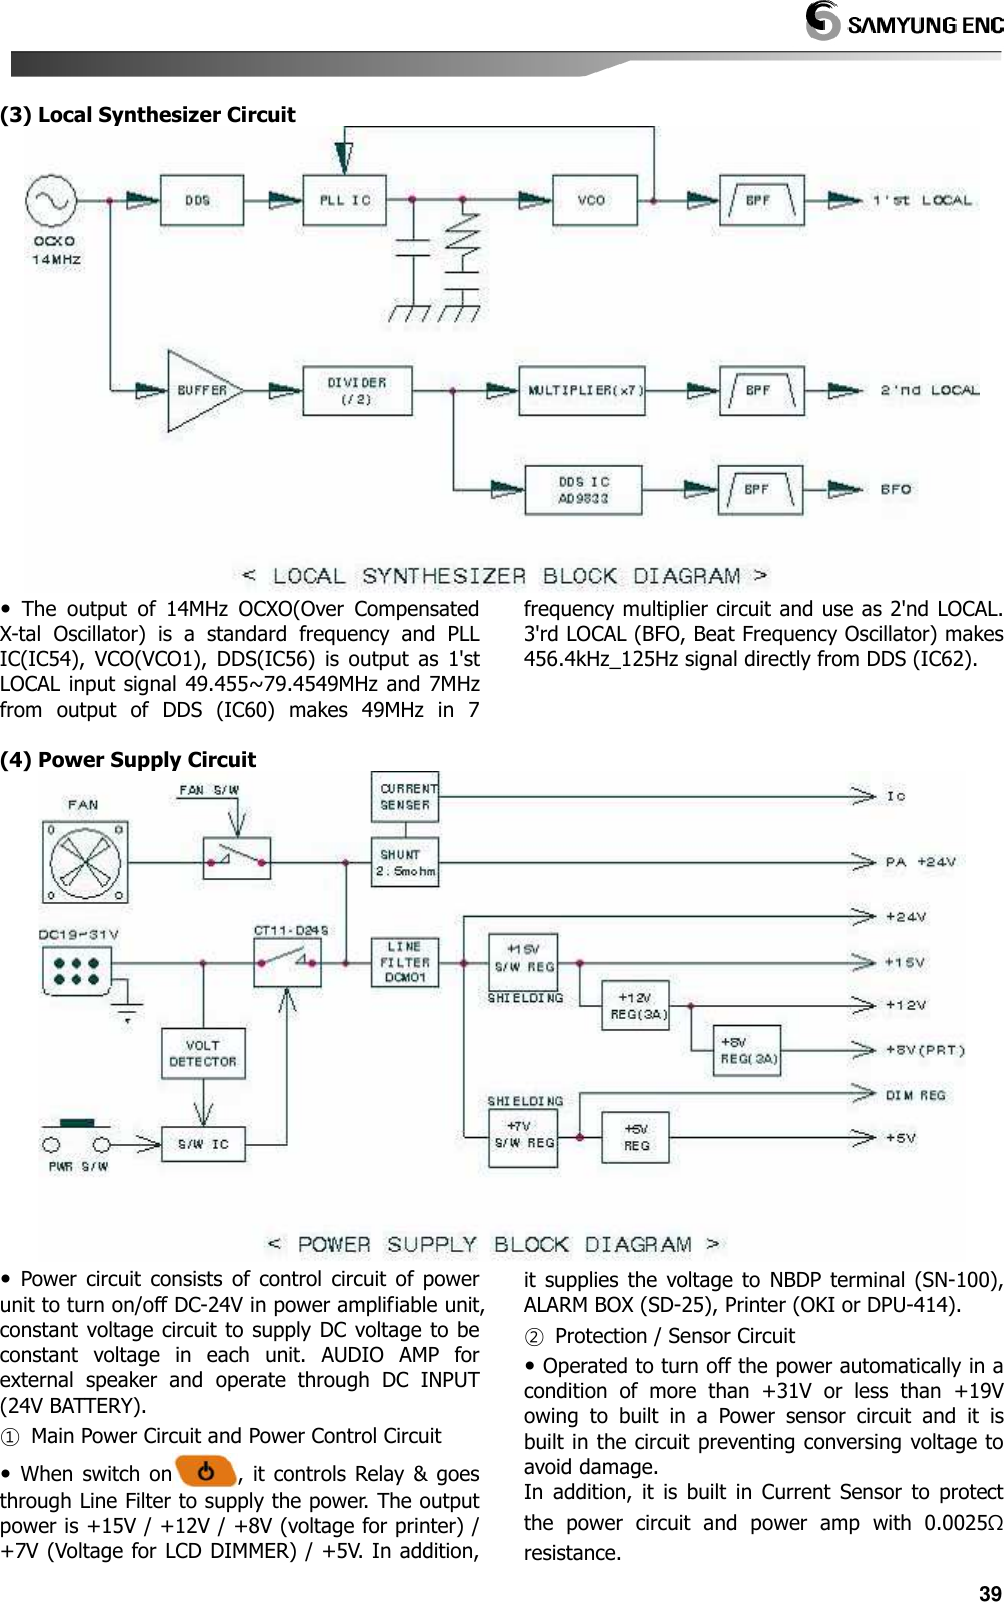   39 (3) Local Synthesizer Circuit    The  output  of  14MHz  OCXO(Over  Compensated X-tal  Oscillator)  is  a  standard  frequency  and  PLL IC(IC54),  VCO(VCO1),  DDS(IC56)  is  output  as  1&apos;st LOCAL input signal 49.455~79.4549MHz and 7MHz from  output  of  DDS  (IC60)  makes  49MHz  in  7 frequency multiplier circuit and use as 2&apos;nd LOCAL. 3&apos;rd LOCAL (BFO, Beat Frequency Oscillator) makes 456.4kHz_125Hz signal directly from DDS (IC62).   (4) Power Supply Circuit    Power  circuit  consists  of  control  circuit  of  power unit to turn on/off DC-24V in power amplifiable unit, constant voltage circuit to supply DC  voltage to  be constant  voltage  in  each  unit.  AUDIO  AMP  for external  speaker  and  operate  through  DC  INPUT (24V BATTERY). ①  Main Power Circuit and Power Control Circuit   When  switch  on , it  controls Relay &amp;  goes through Line Filter to supply the power. The output power is +15V / +12V / +8V (voltage for printer) / +7V (Voltage for LCD DIMMER) / +5V. In addition, it  supplies  the  voltage  to  NBDP terminal  (SN-100), ALARM BOX (SD-25), Printer (OKI or DPU-414). ②  Protection / Sensor Circuit  Operated to turn off the power automatically in a condition  of  more  than  +31V  or  less  than  +19V owing  to  built  in  a  Power  sensor  circuit  and  it  is built in the circuit preventing conversing voltage to avoid damage. In  addition,  it  is  built  in  Current  Sensor  to  protect the  power  circuit  and  power  amp  with  0.0025Ω resistance. 